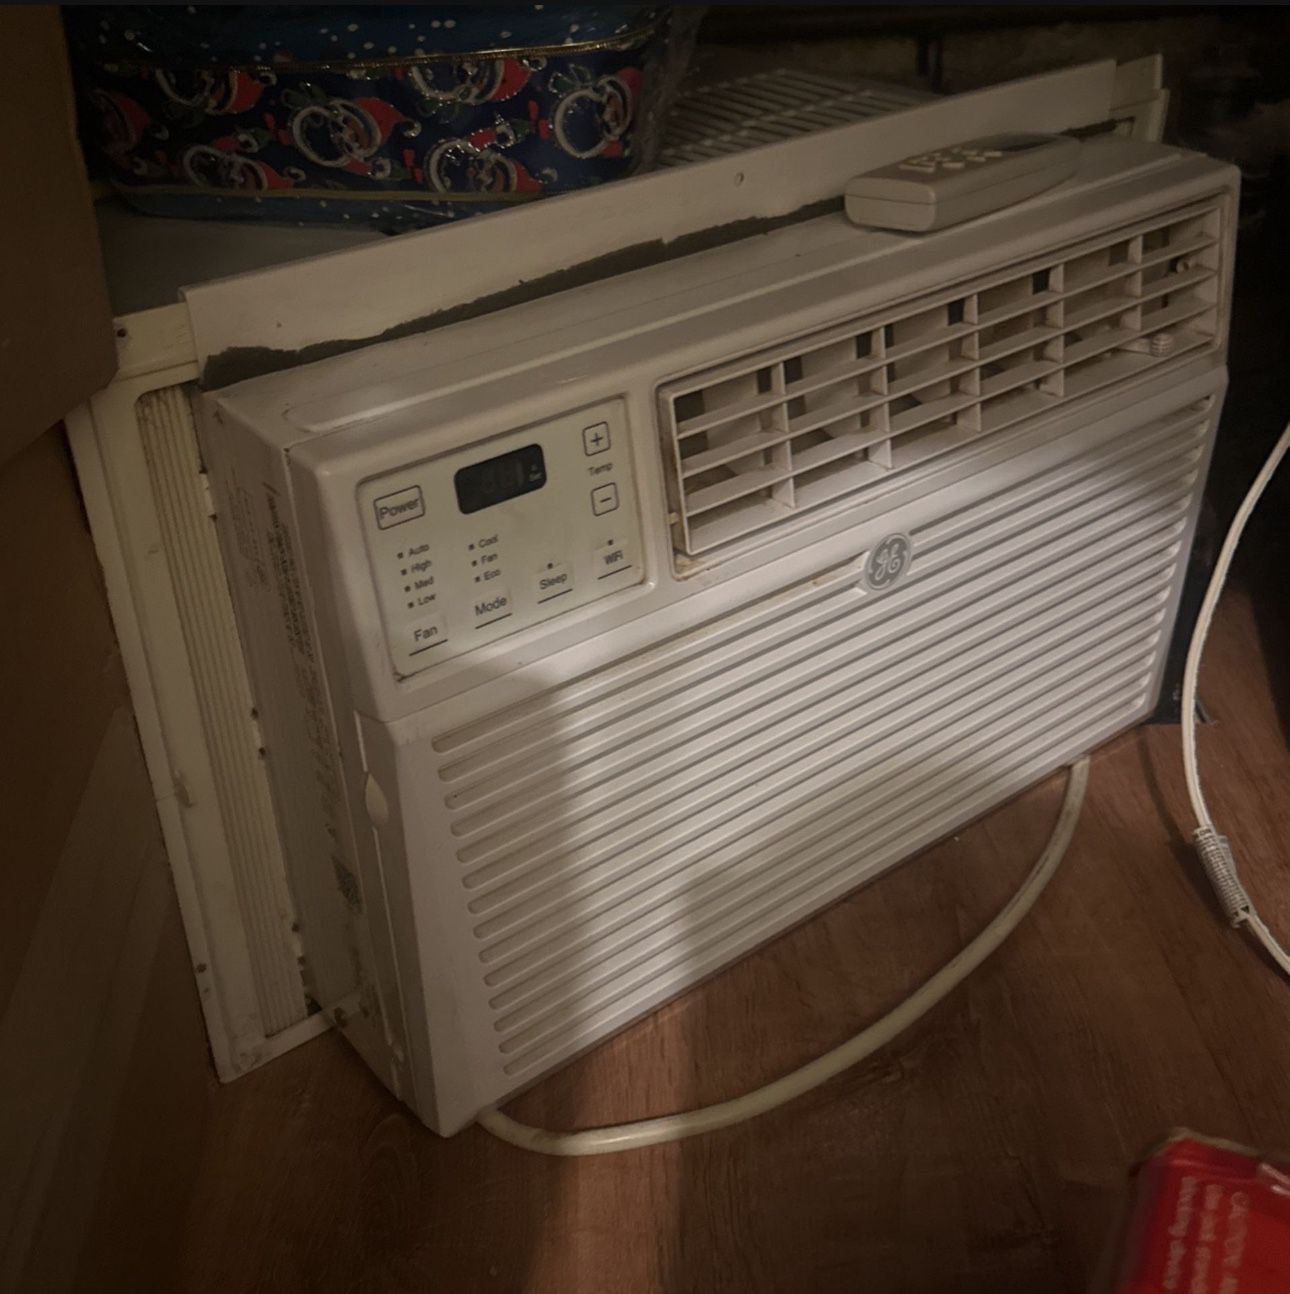 GE WI-FI AIR Conditioner